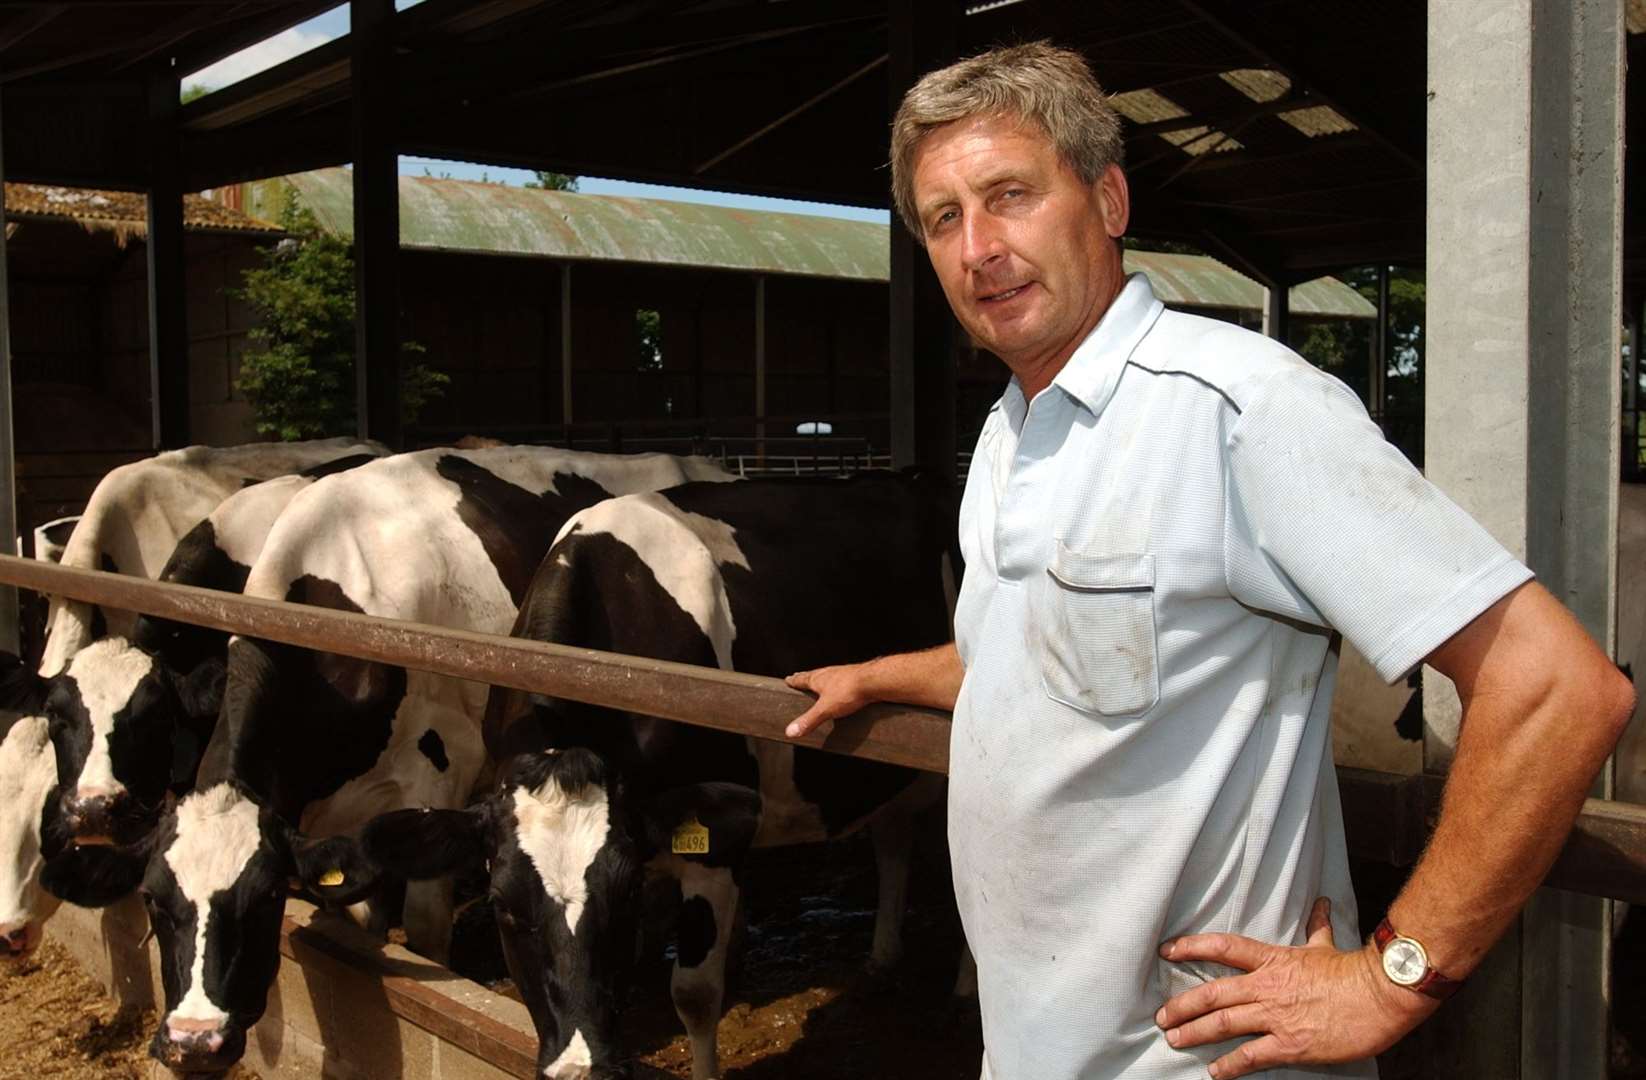 Stephen Furnival of HoneyChild Manor Farm - pictured here in 2005 - is commonly said to be the last dairy farmer on the Marshes. Picture: Matt McArdle.